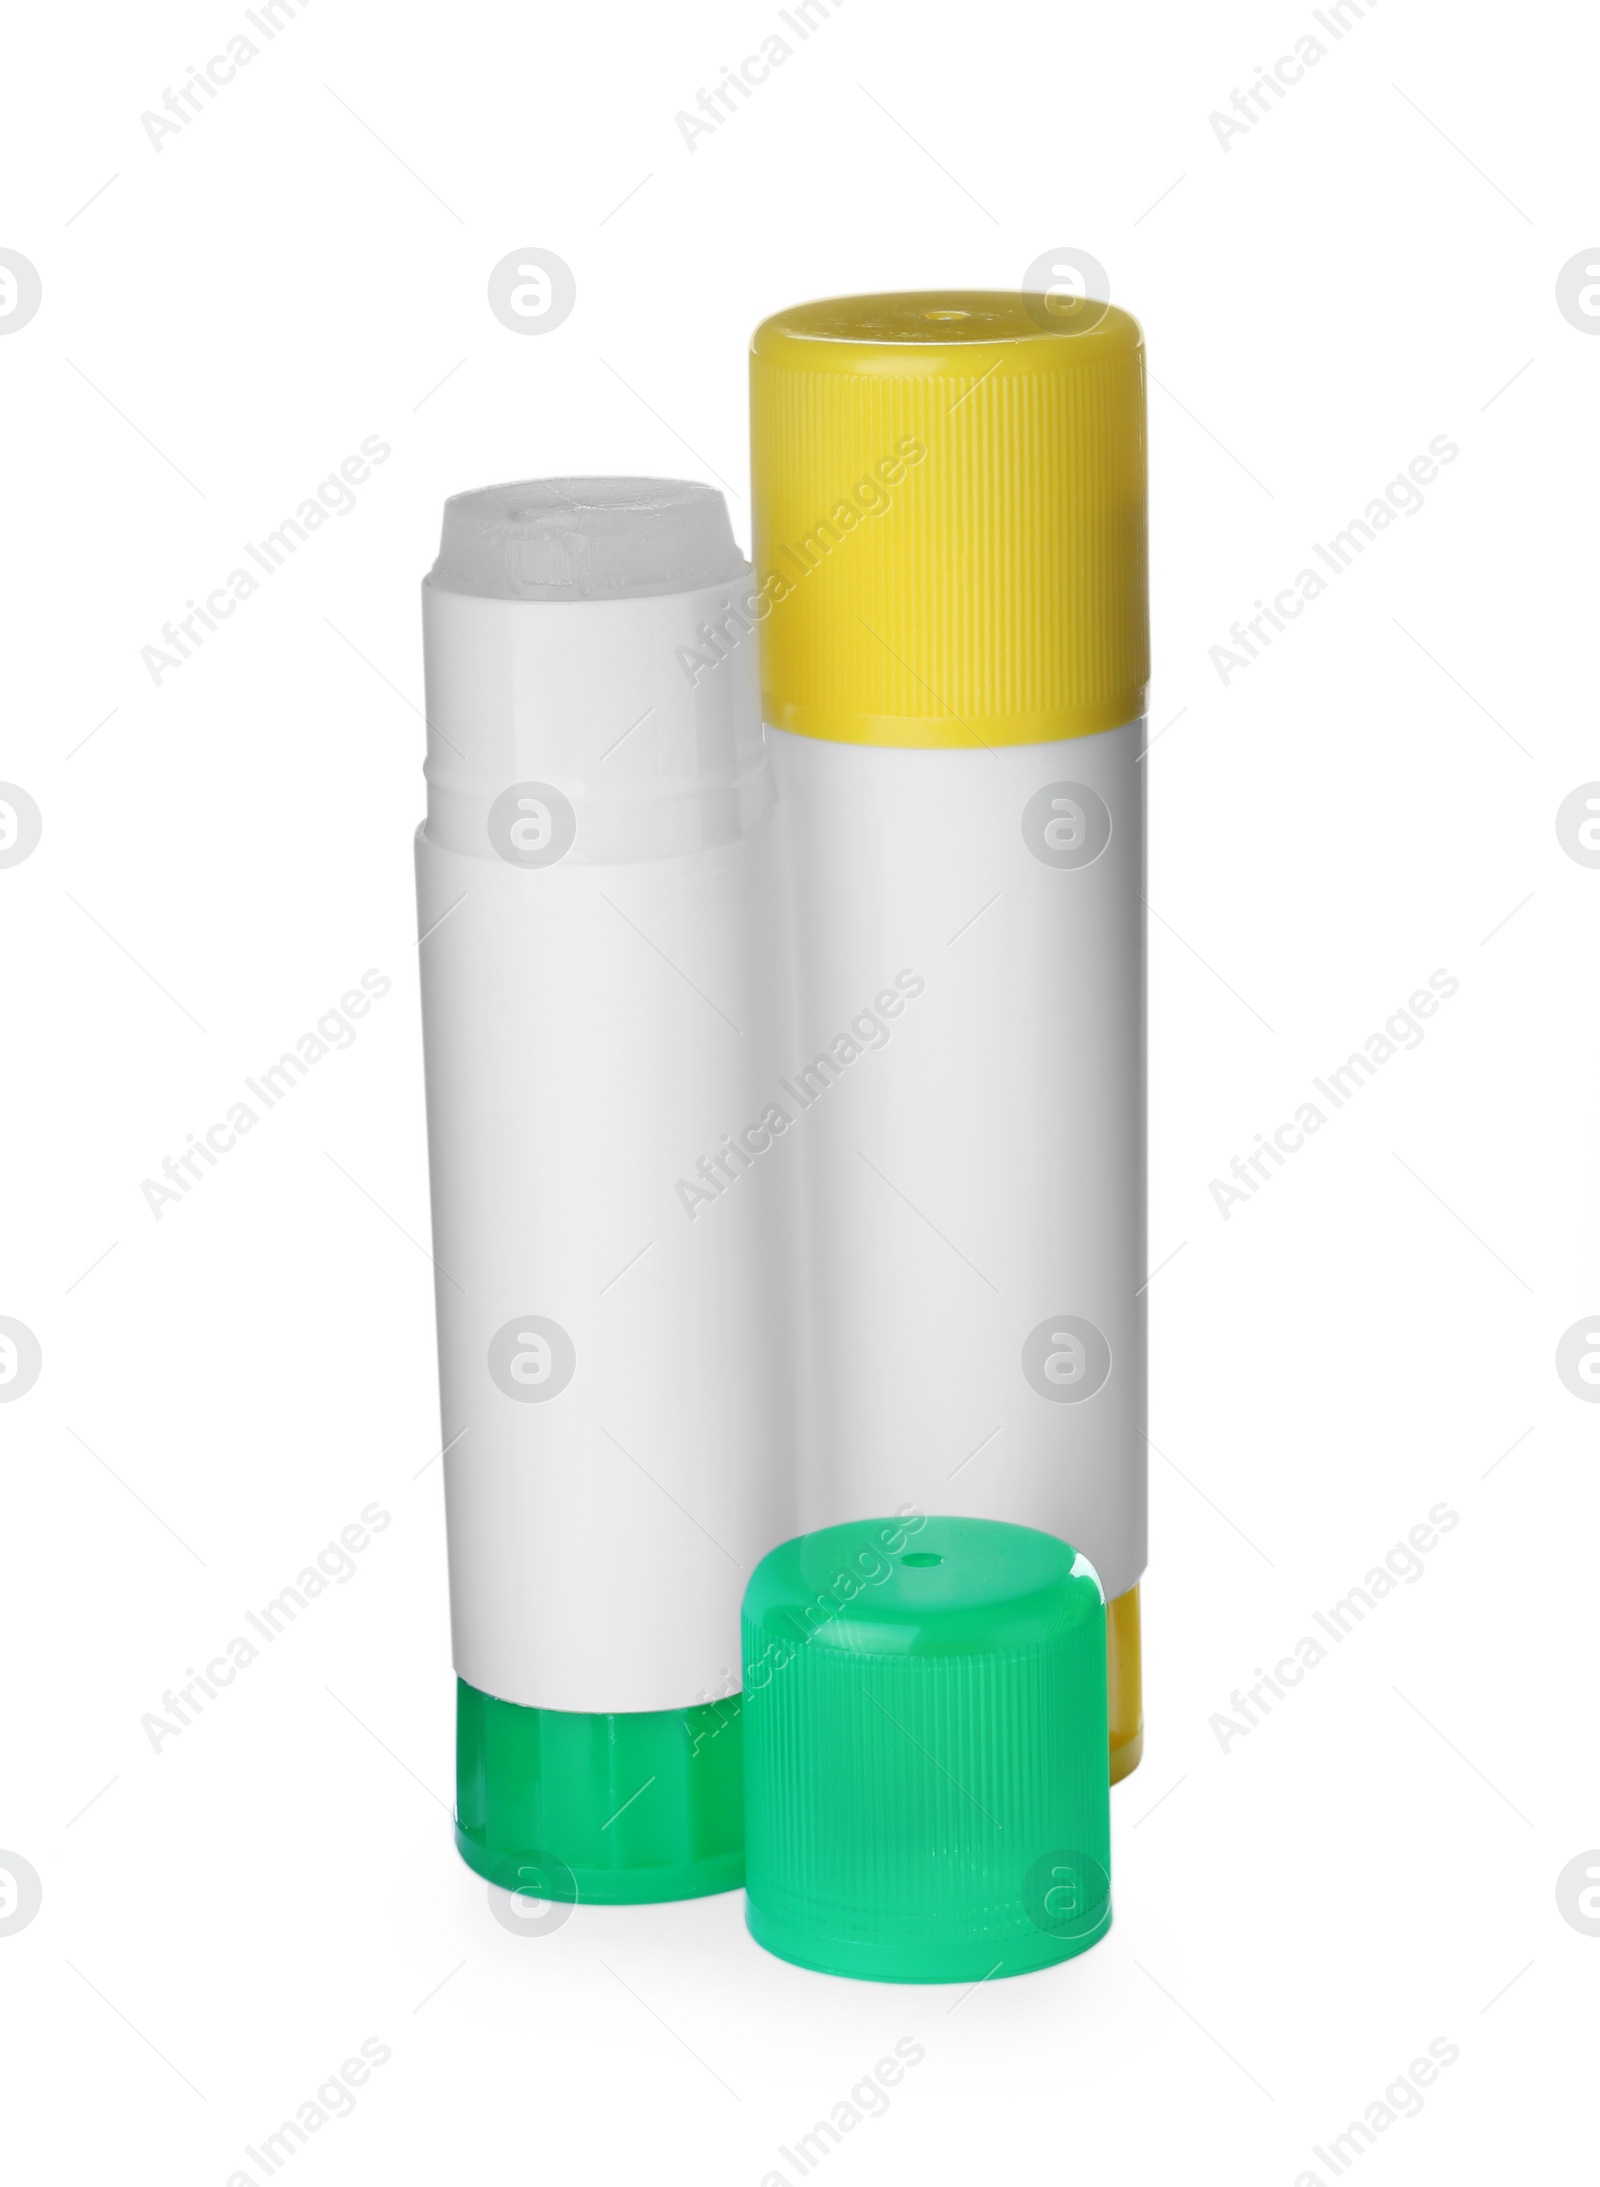 Photo of Different glue sticks and cap on white background